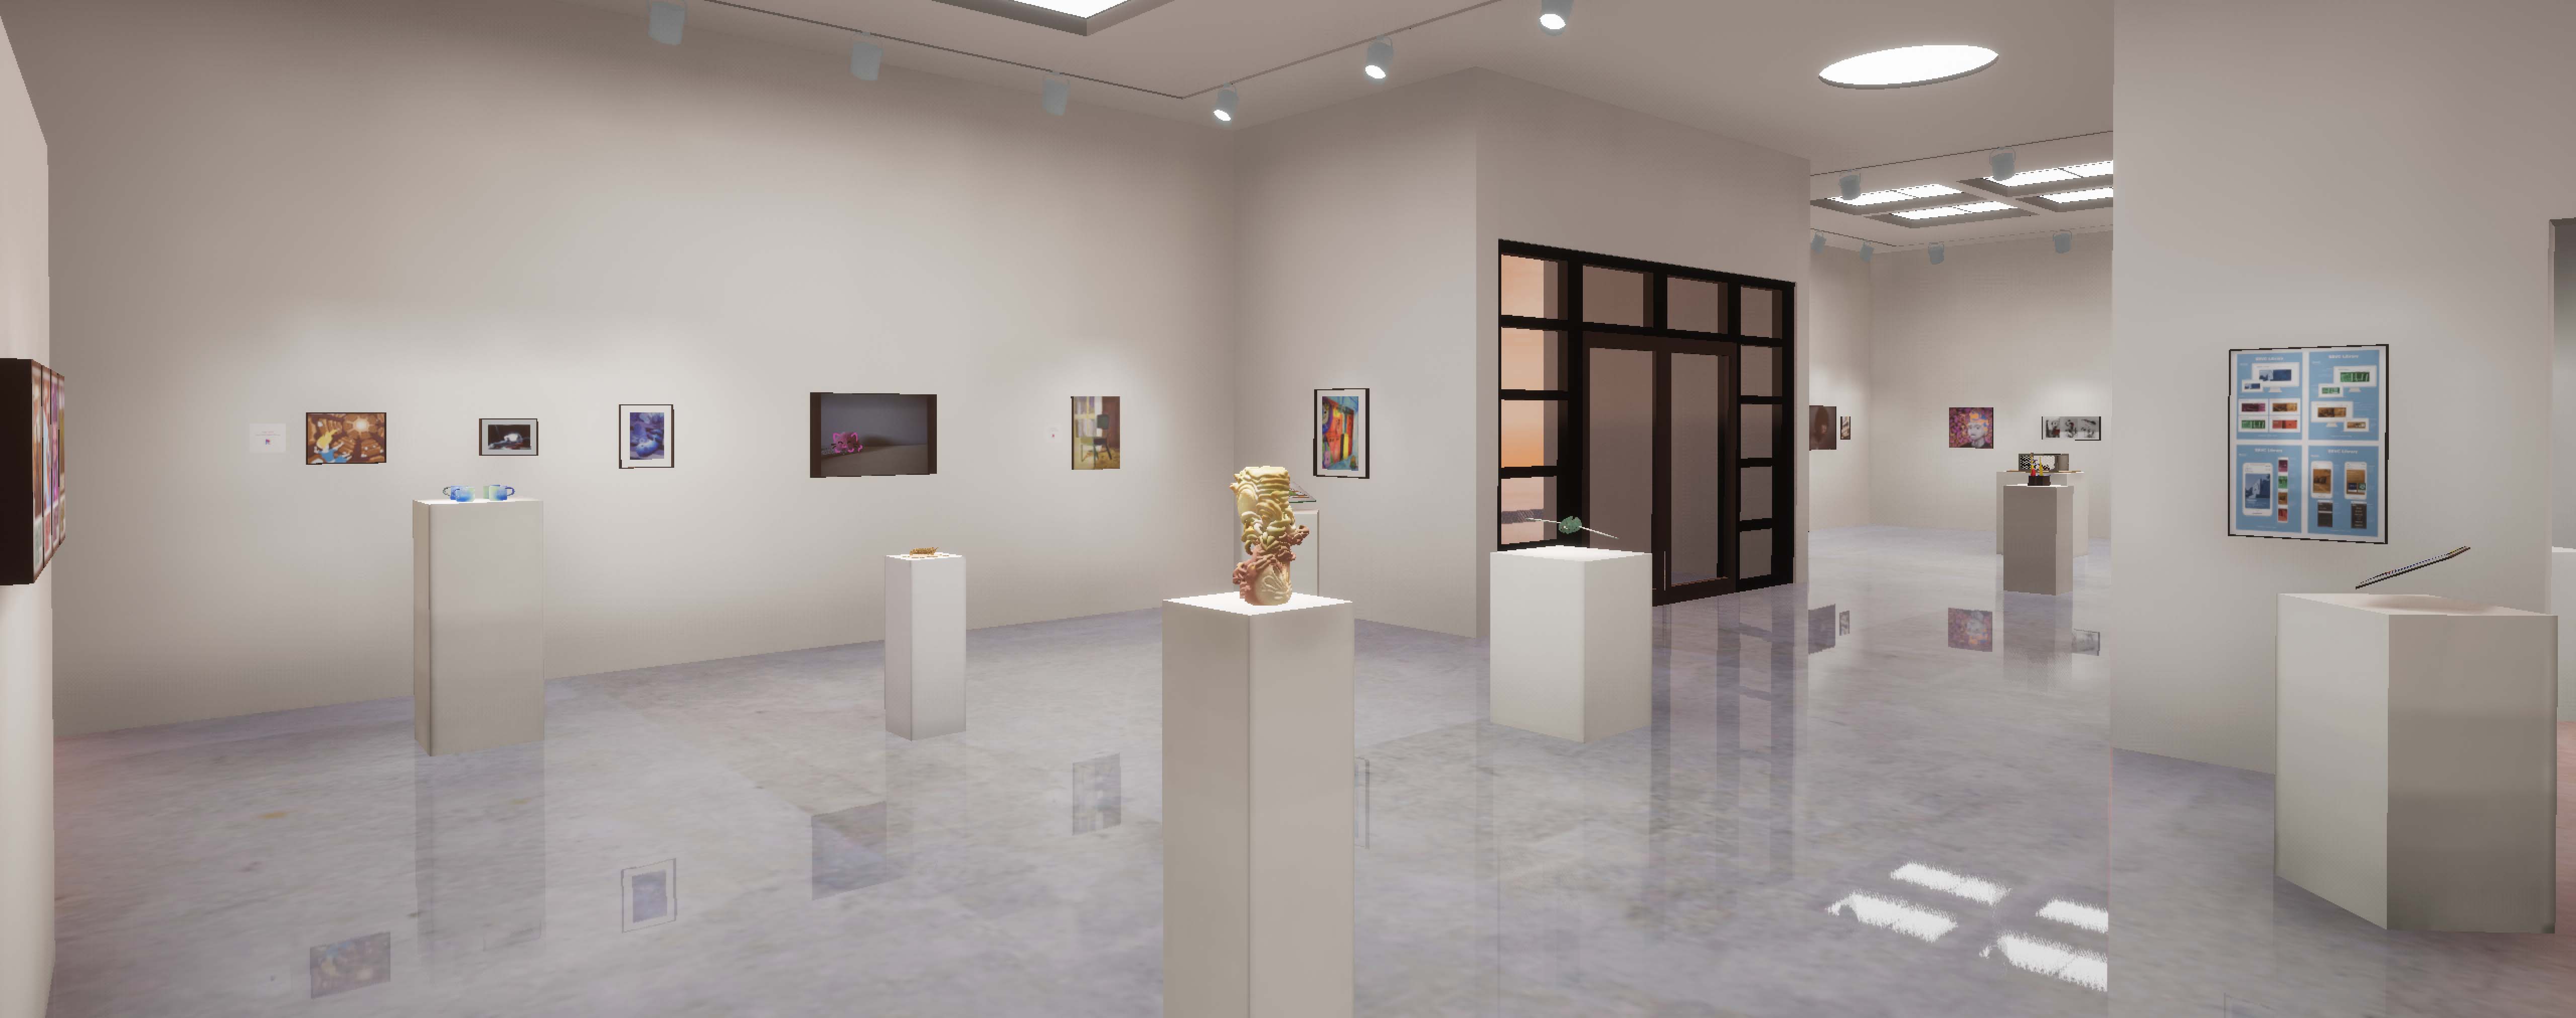 image of virtual gallery space with various sculptures on stands and 2d work mounted on the walls.